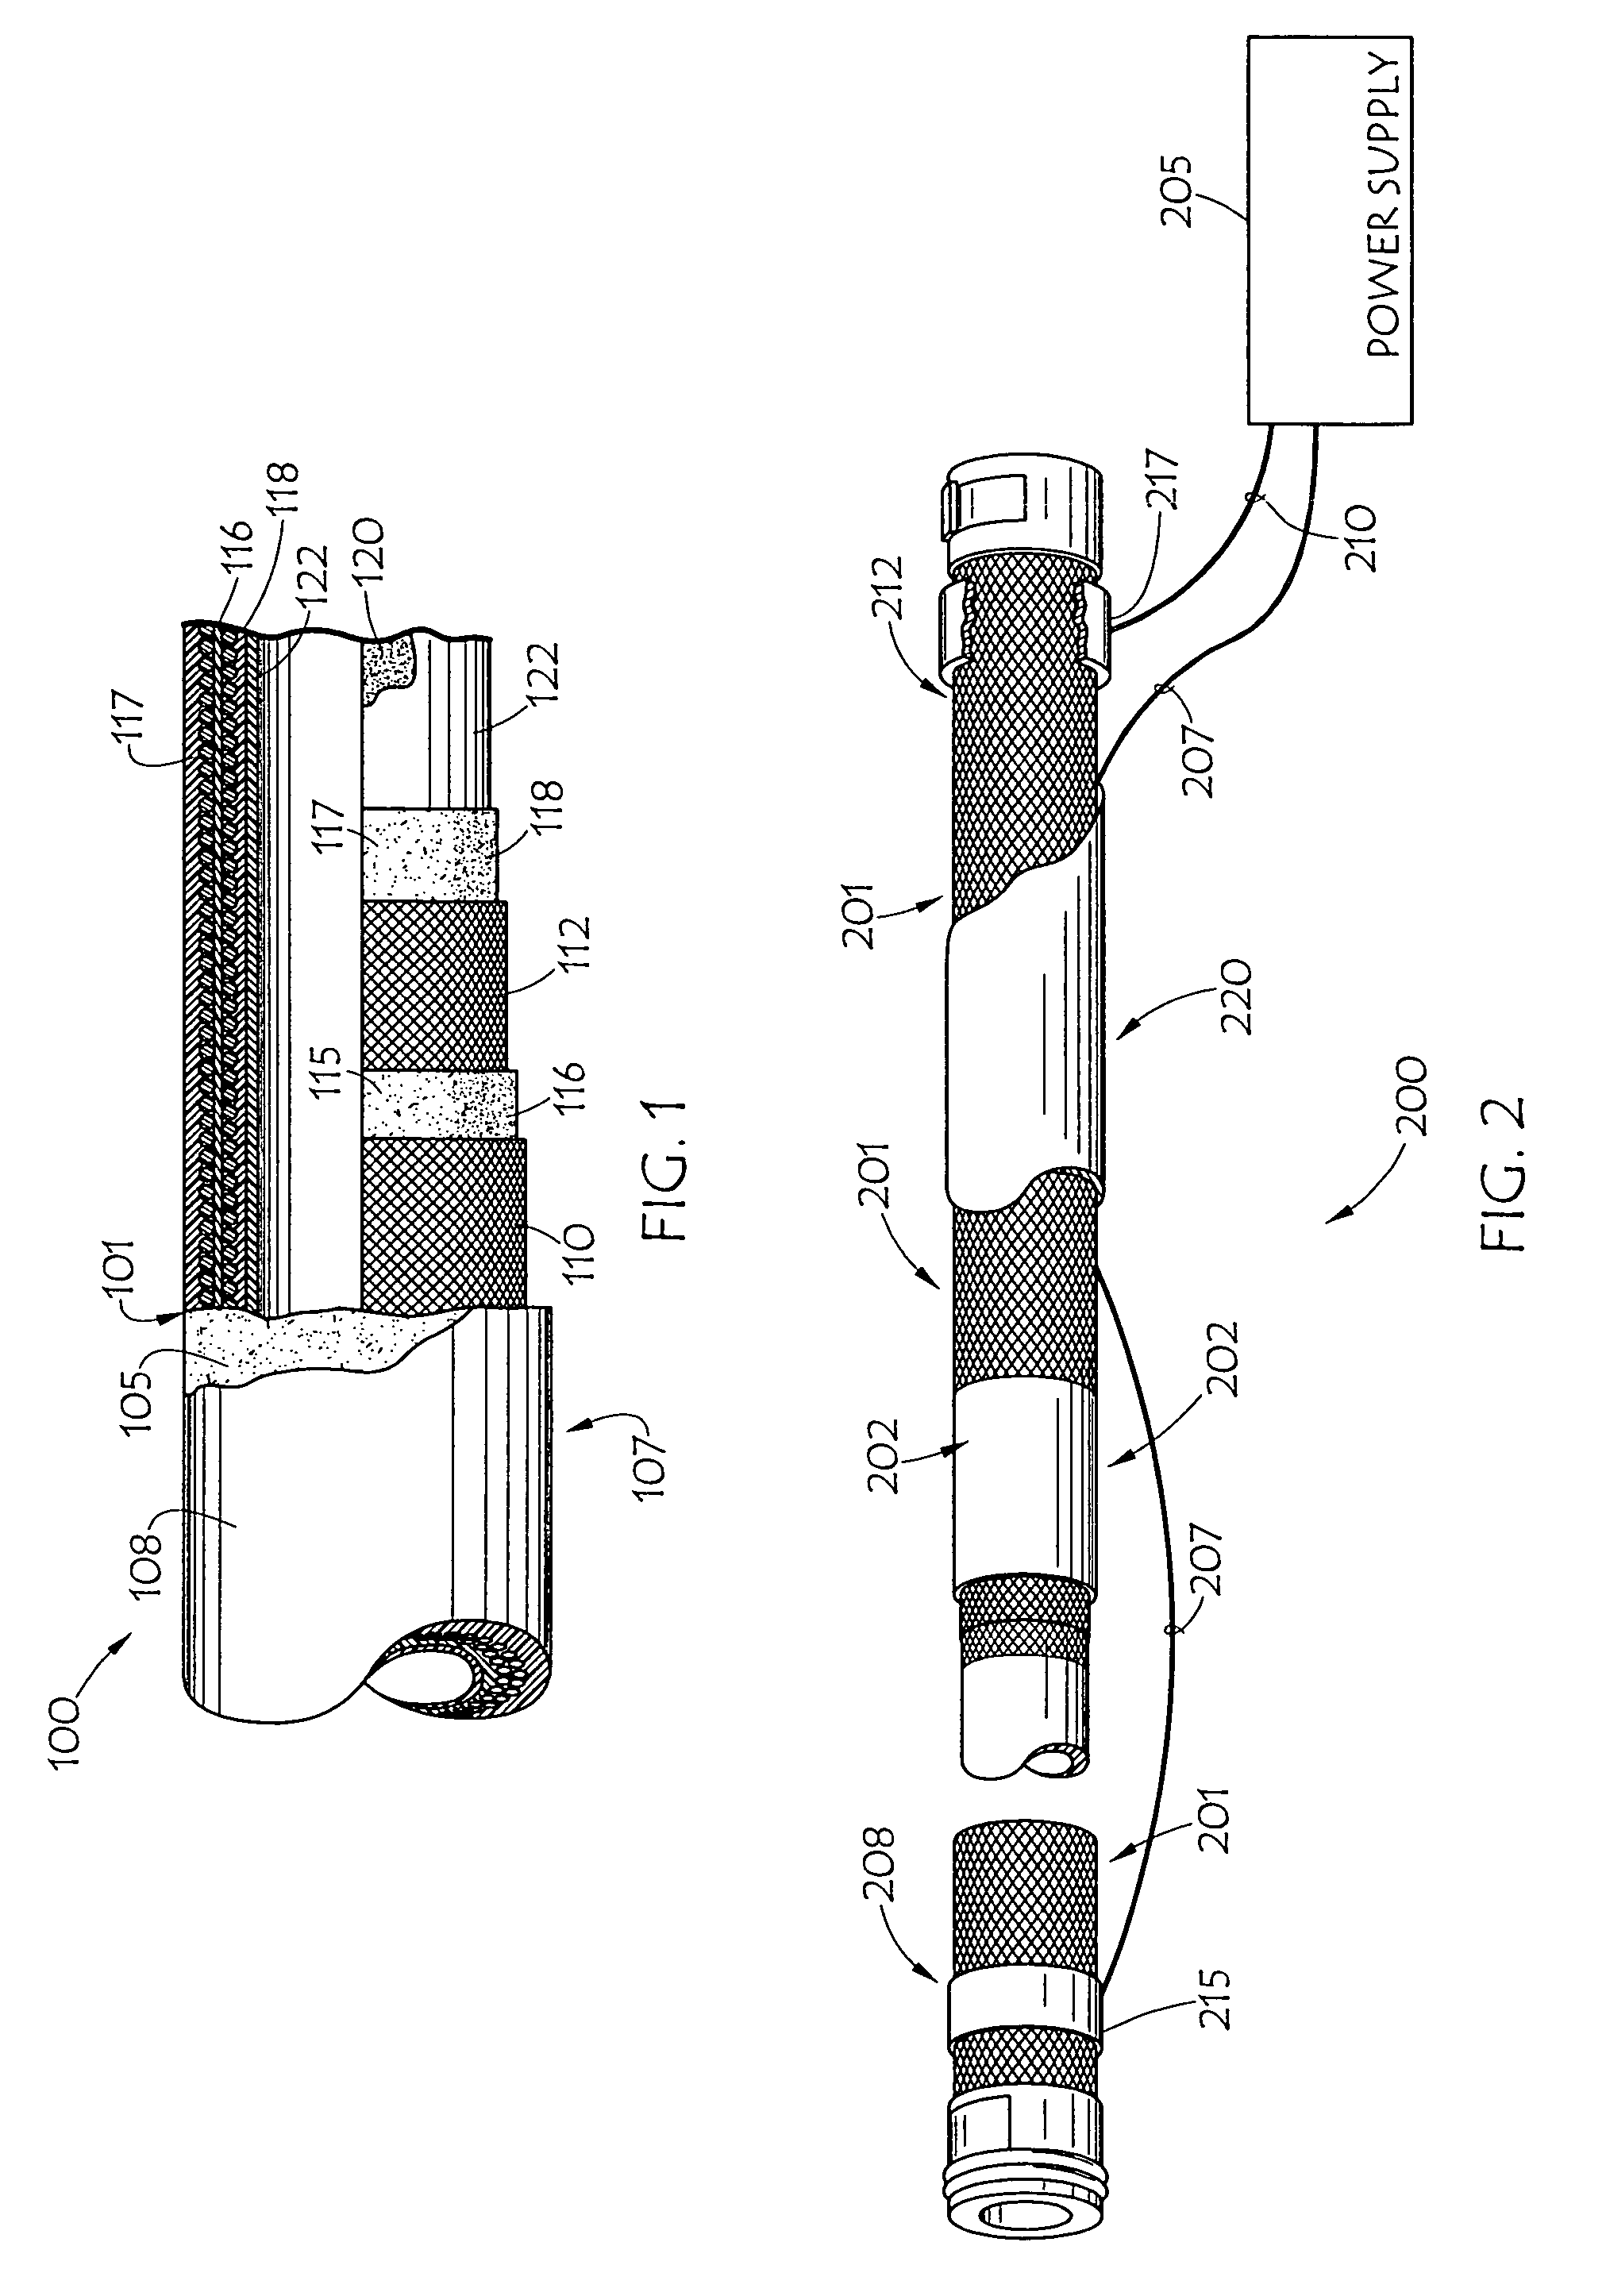 Heated fluid conduits, systems and methods